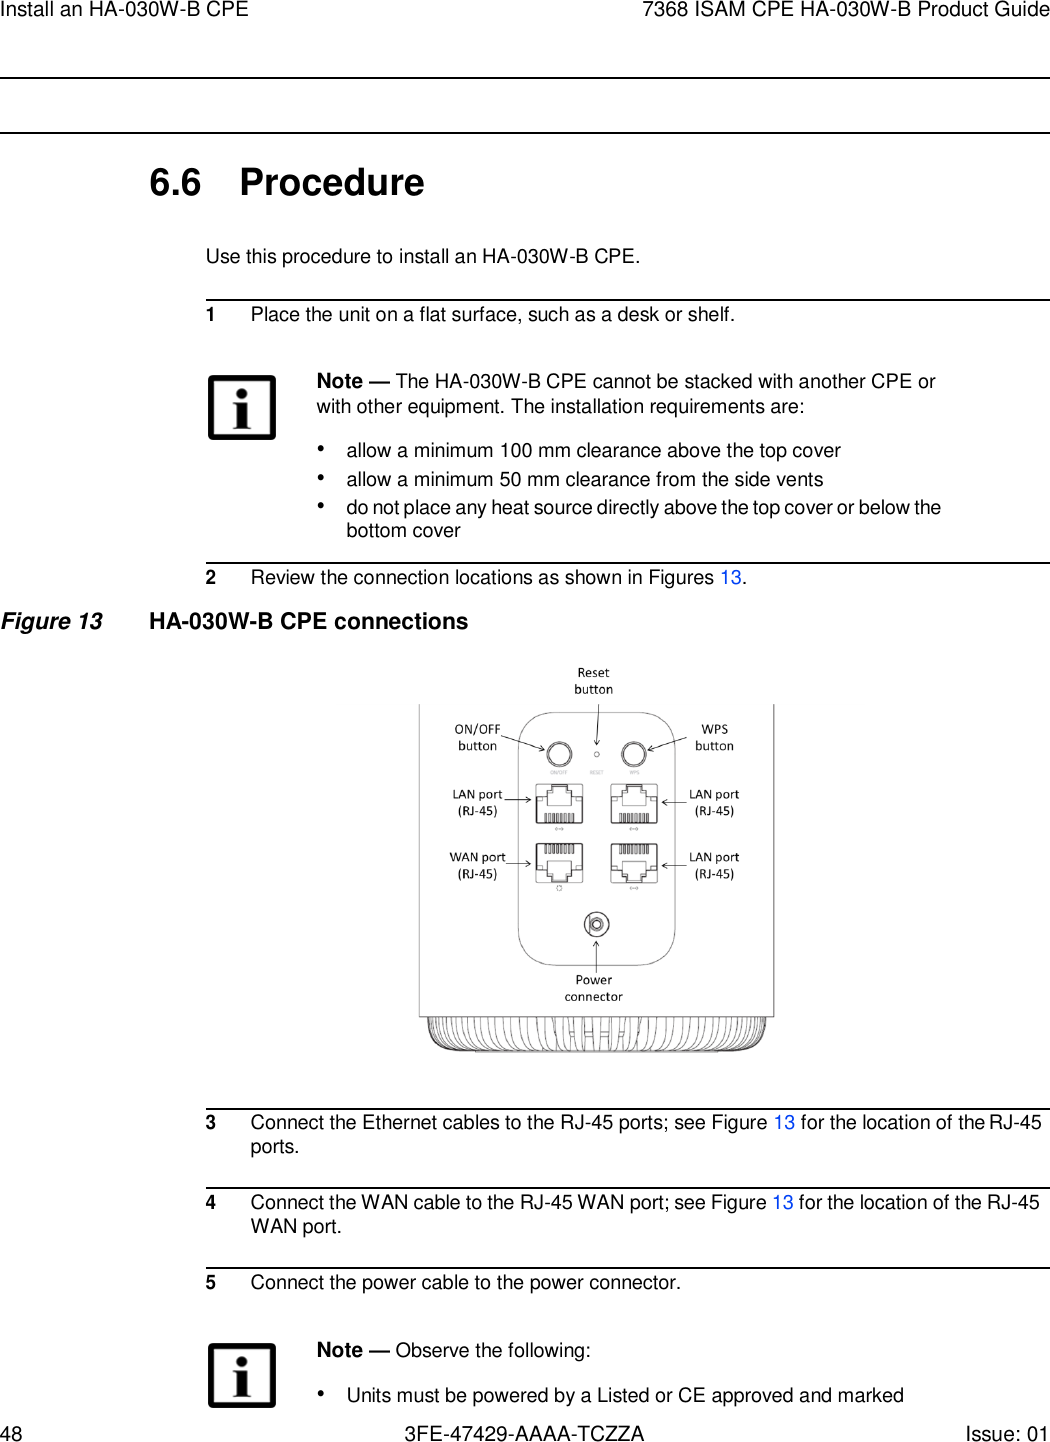 Page 48 of Nokia Bell HA030WB 7368 Intelligent Services Access Manager CPE User Manual 7368 ISAM CPE HA 020W A Product Guide